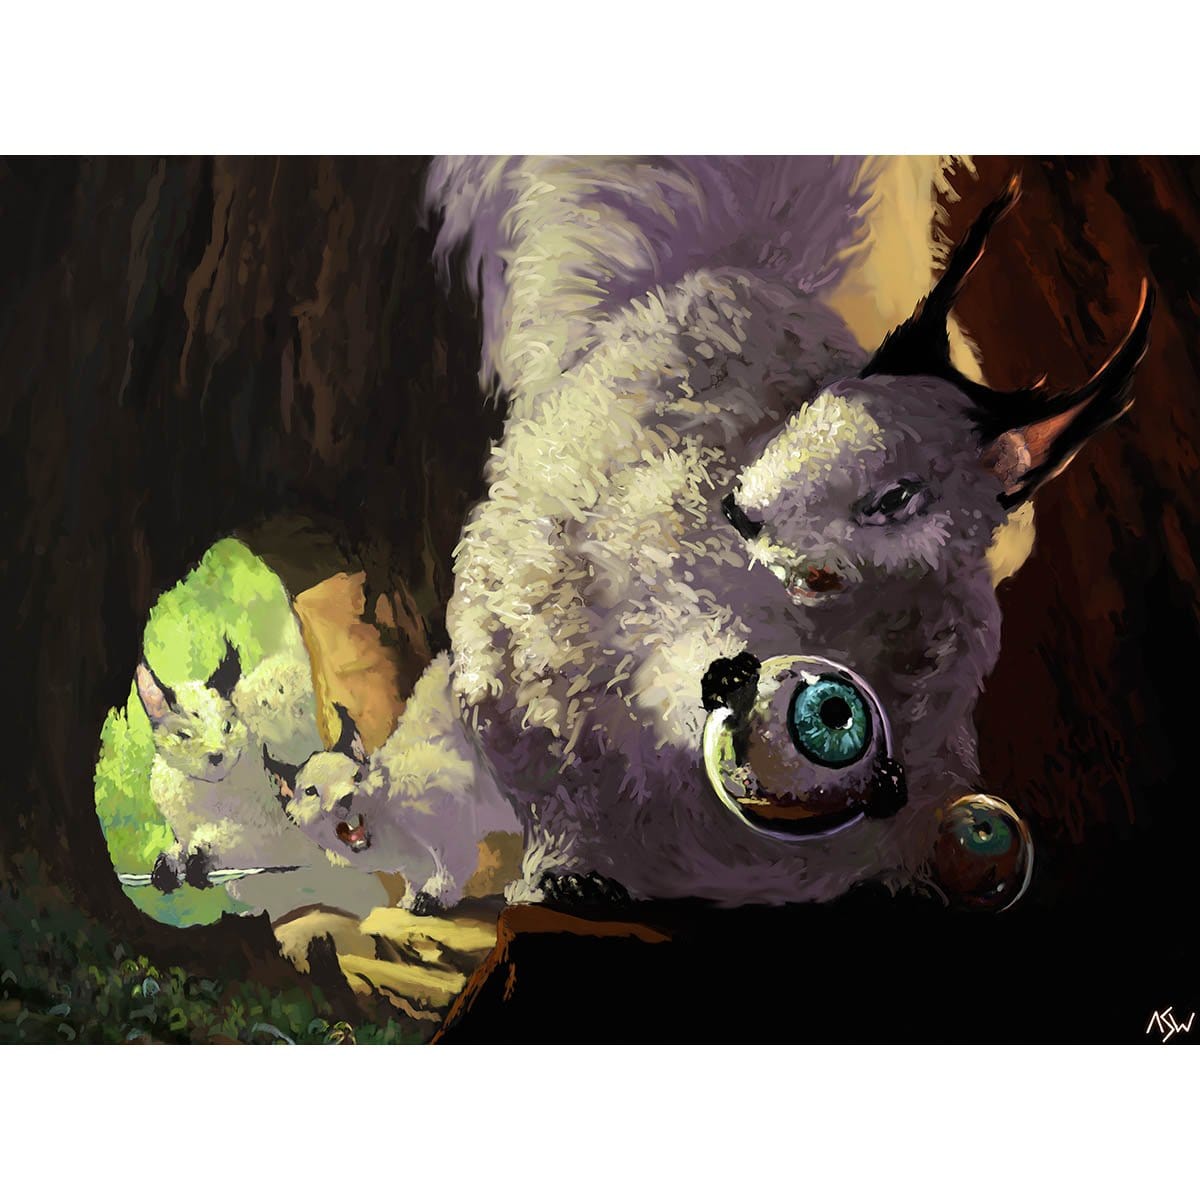 Squirrel's Nest Print - Print - Original Magic Art - Accessories for Magic the Gathering and other card games